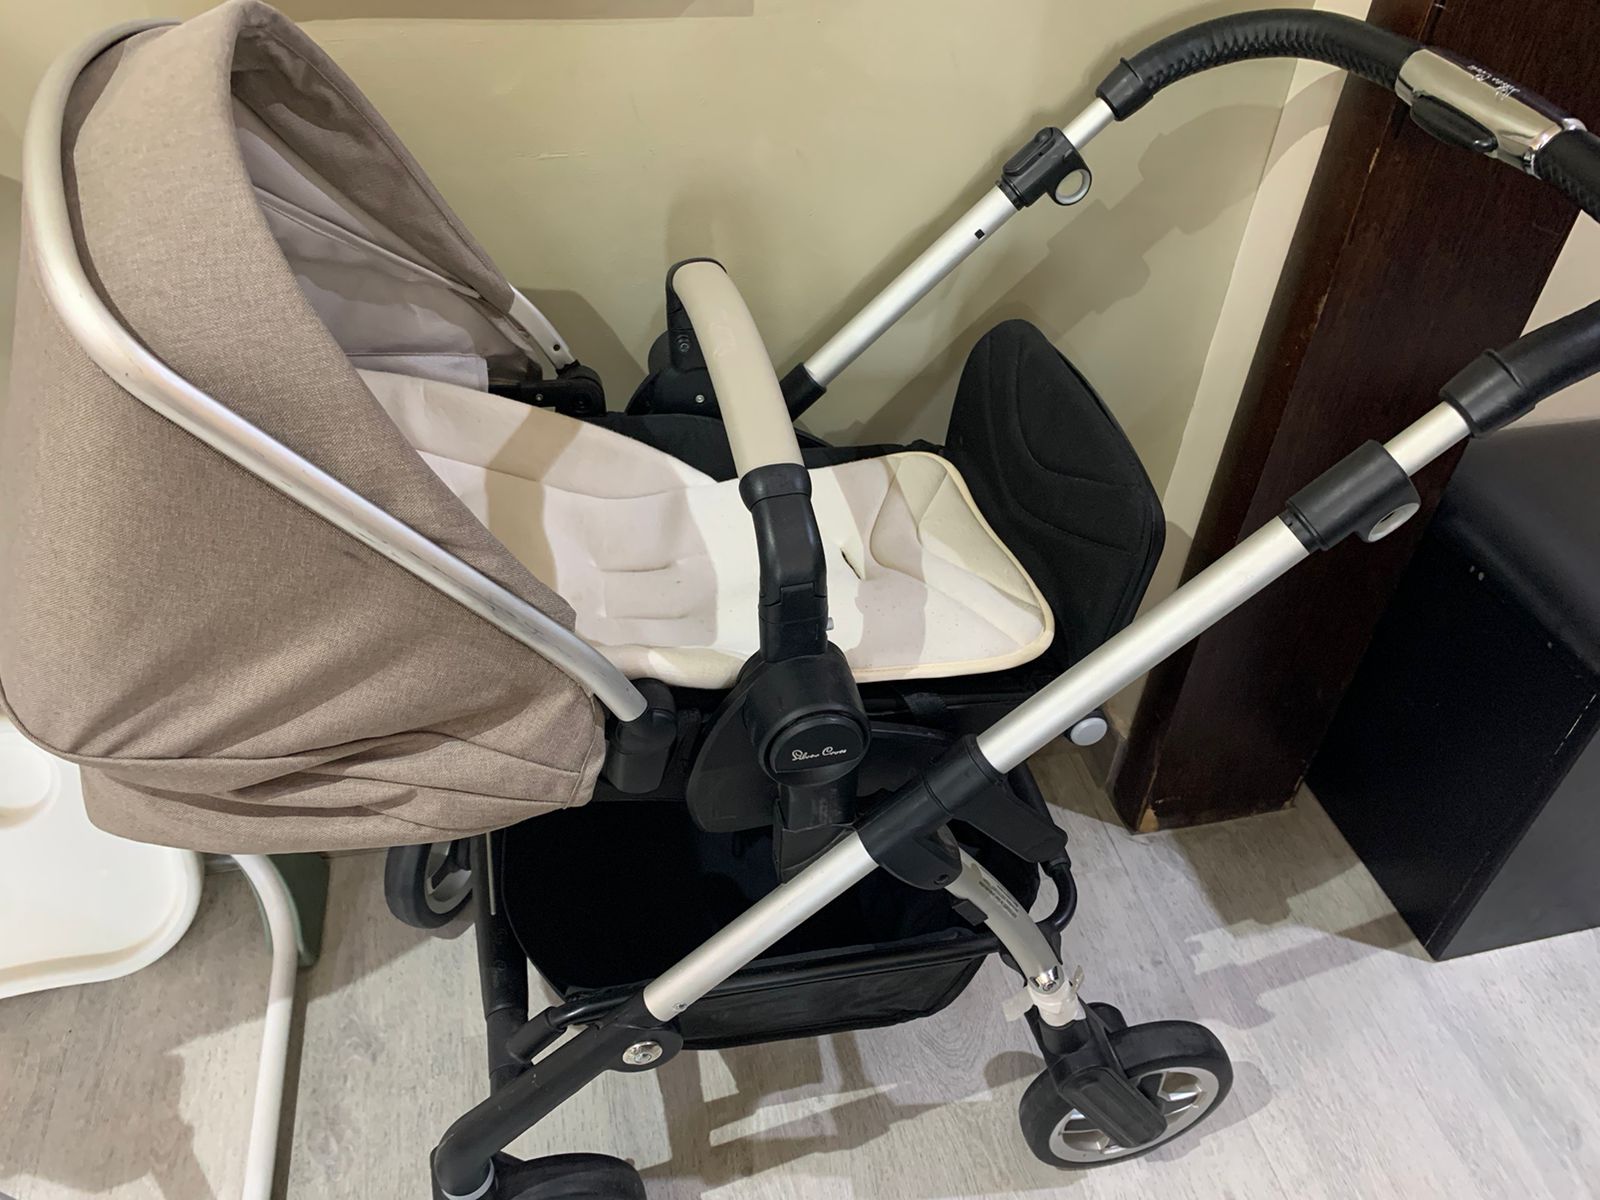 For sale Baby sterilizer, pram and car seat